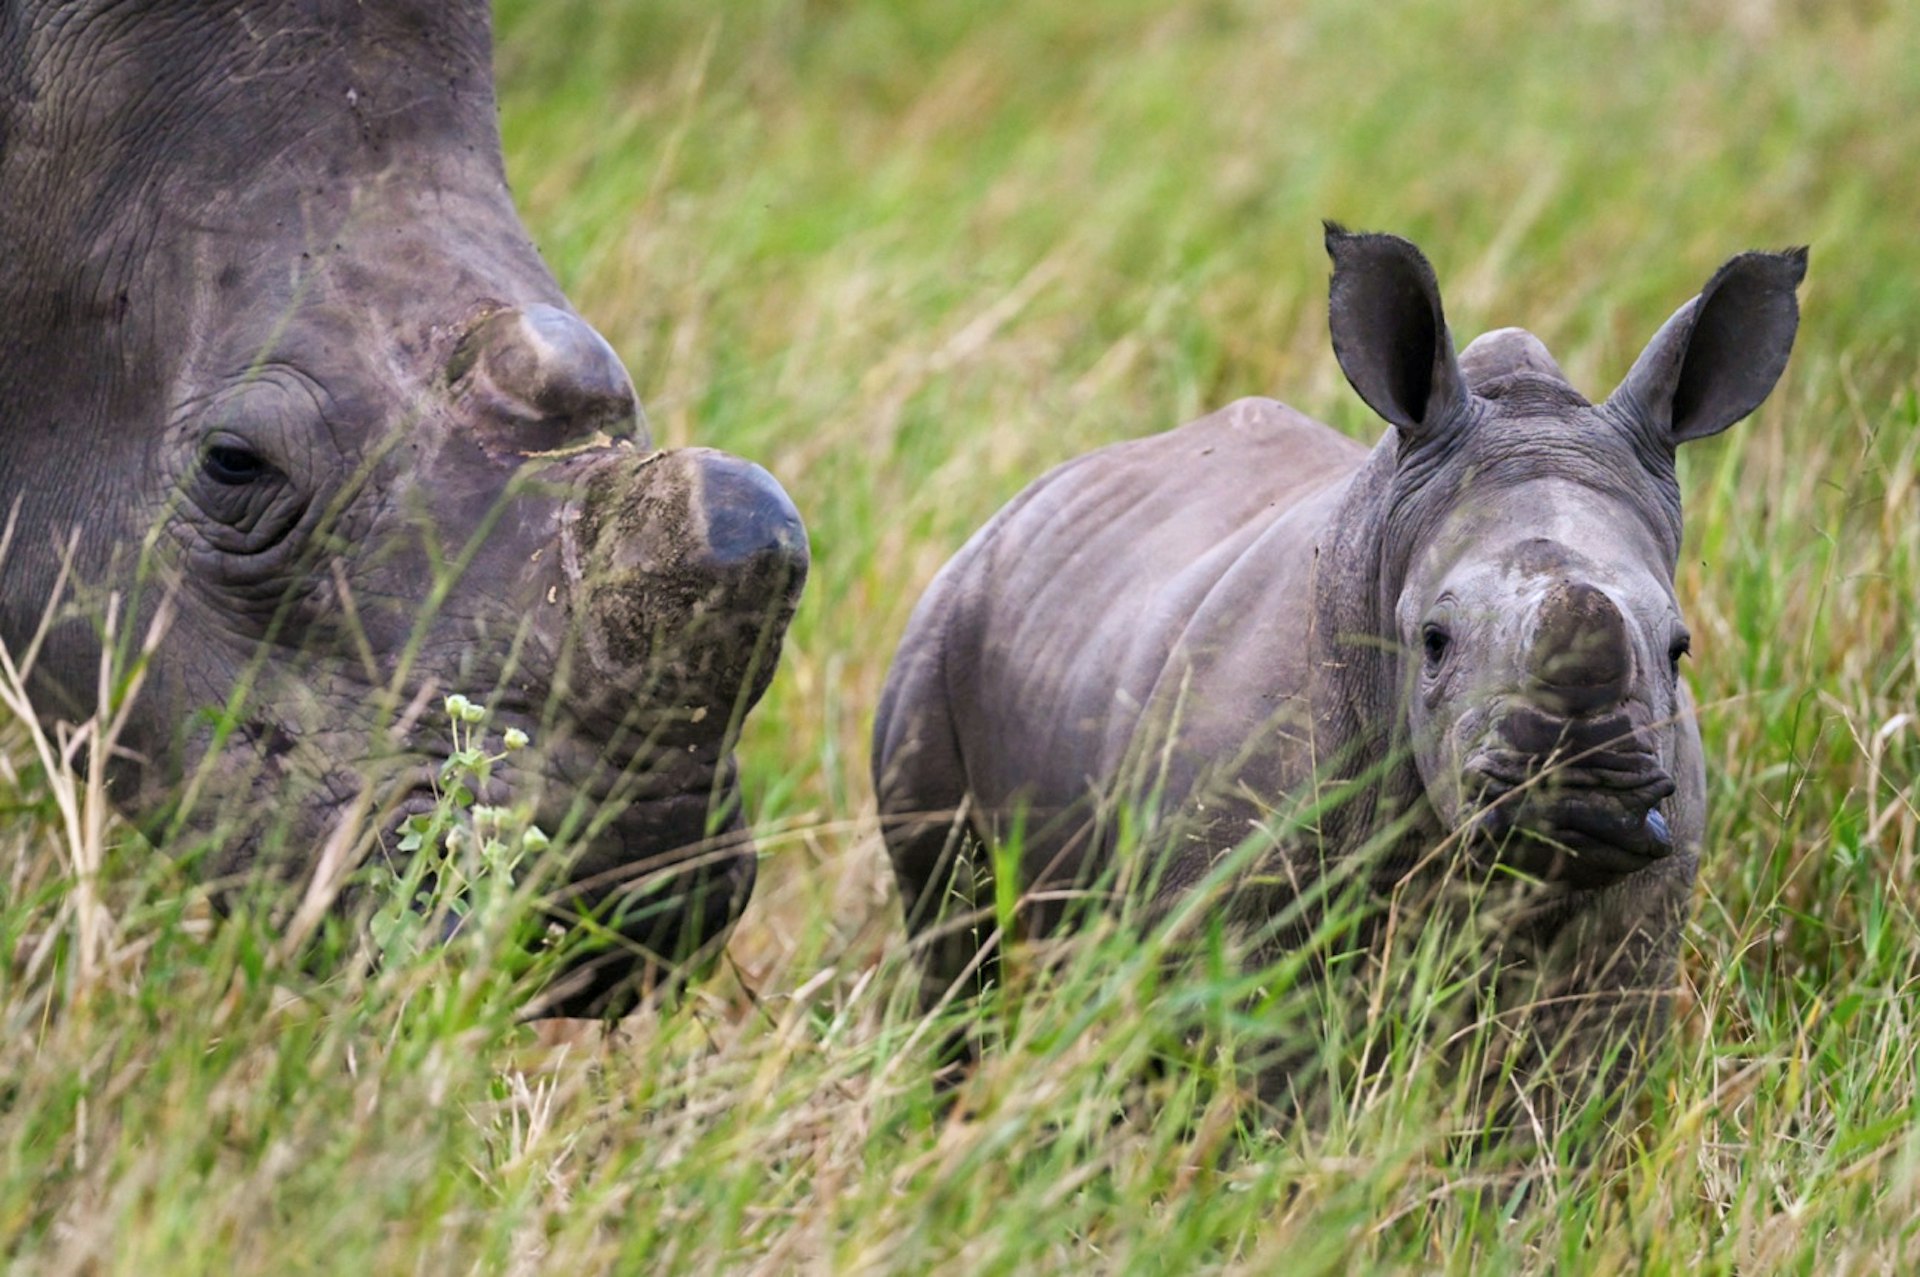 A mother rhino with trimmed horns and her calf